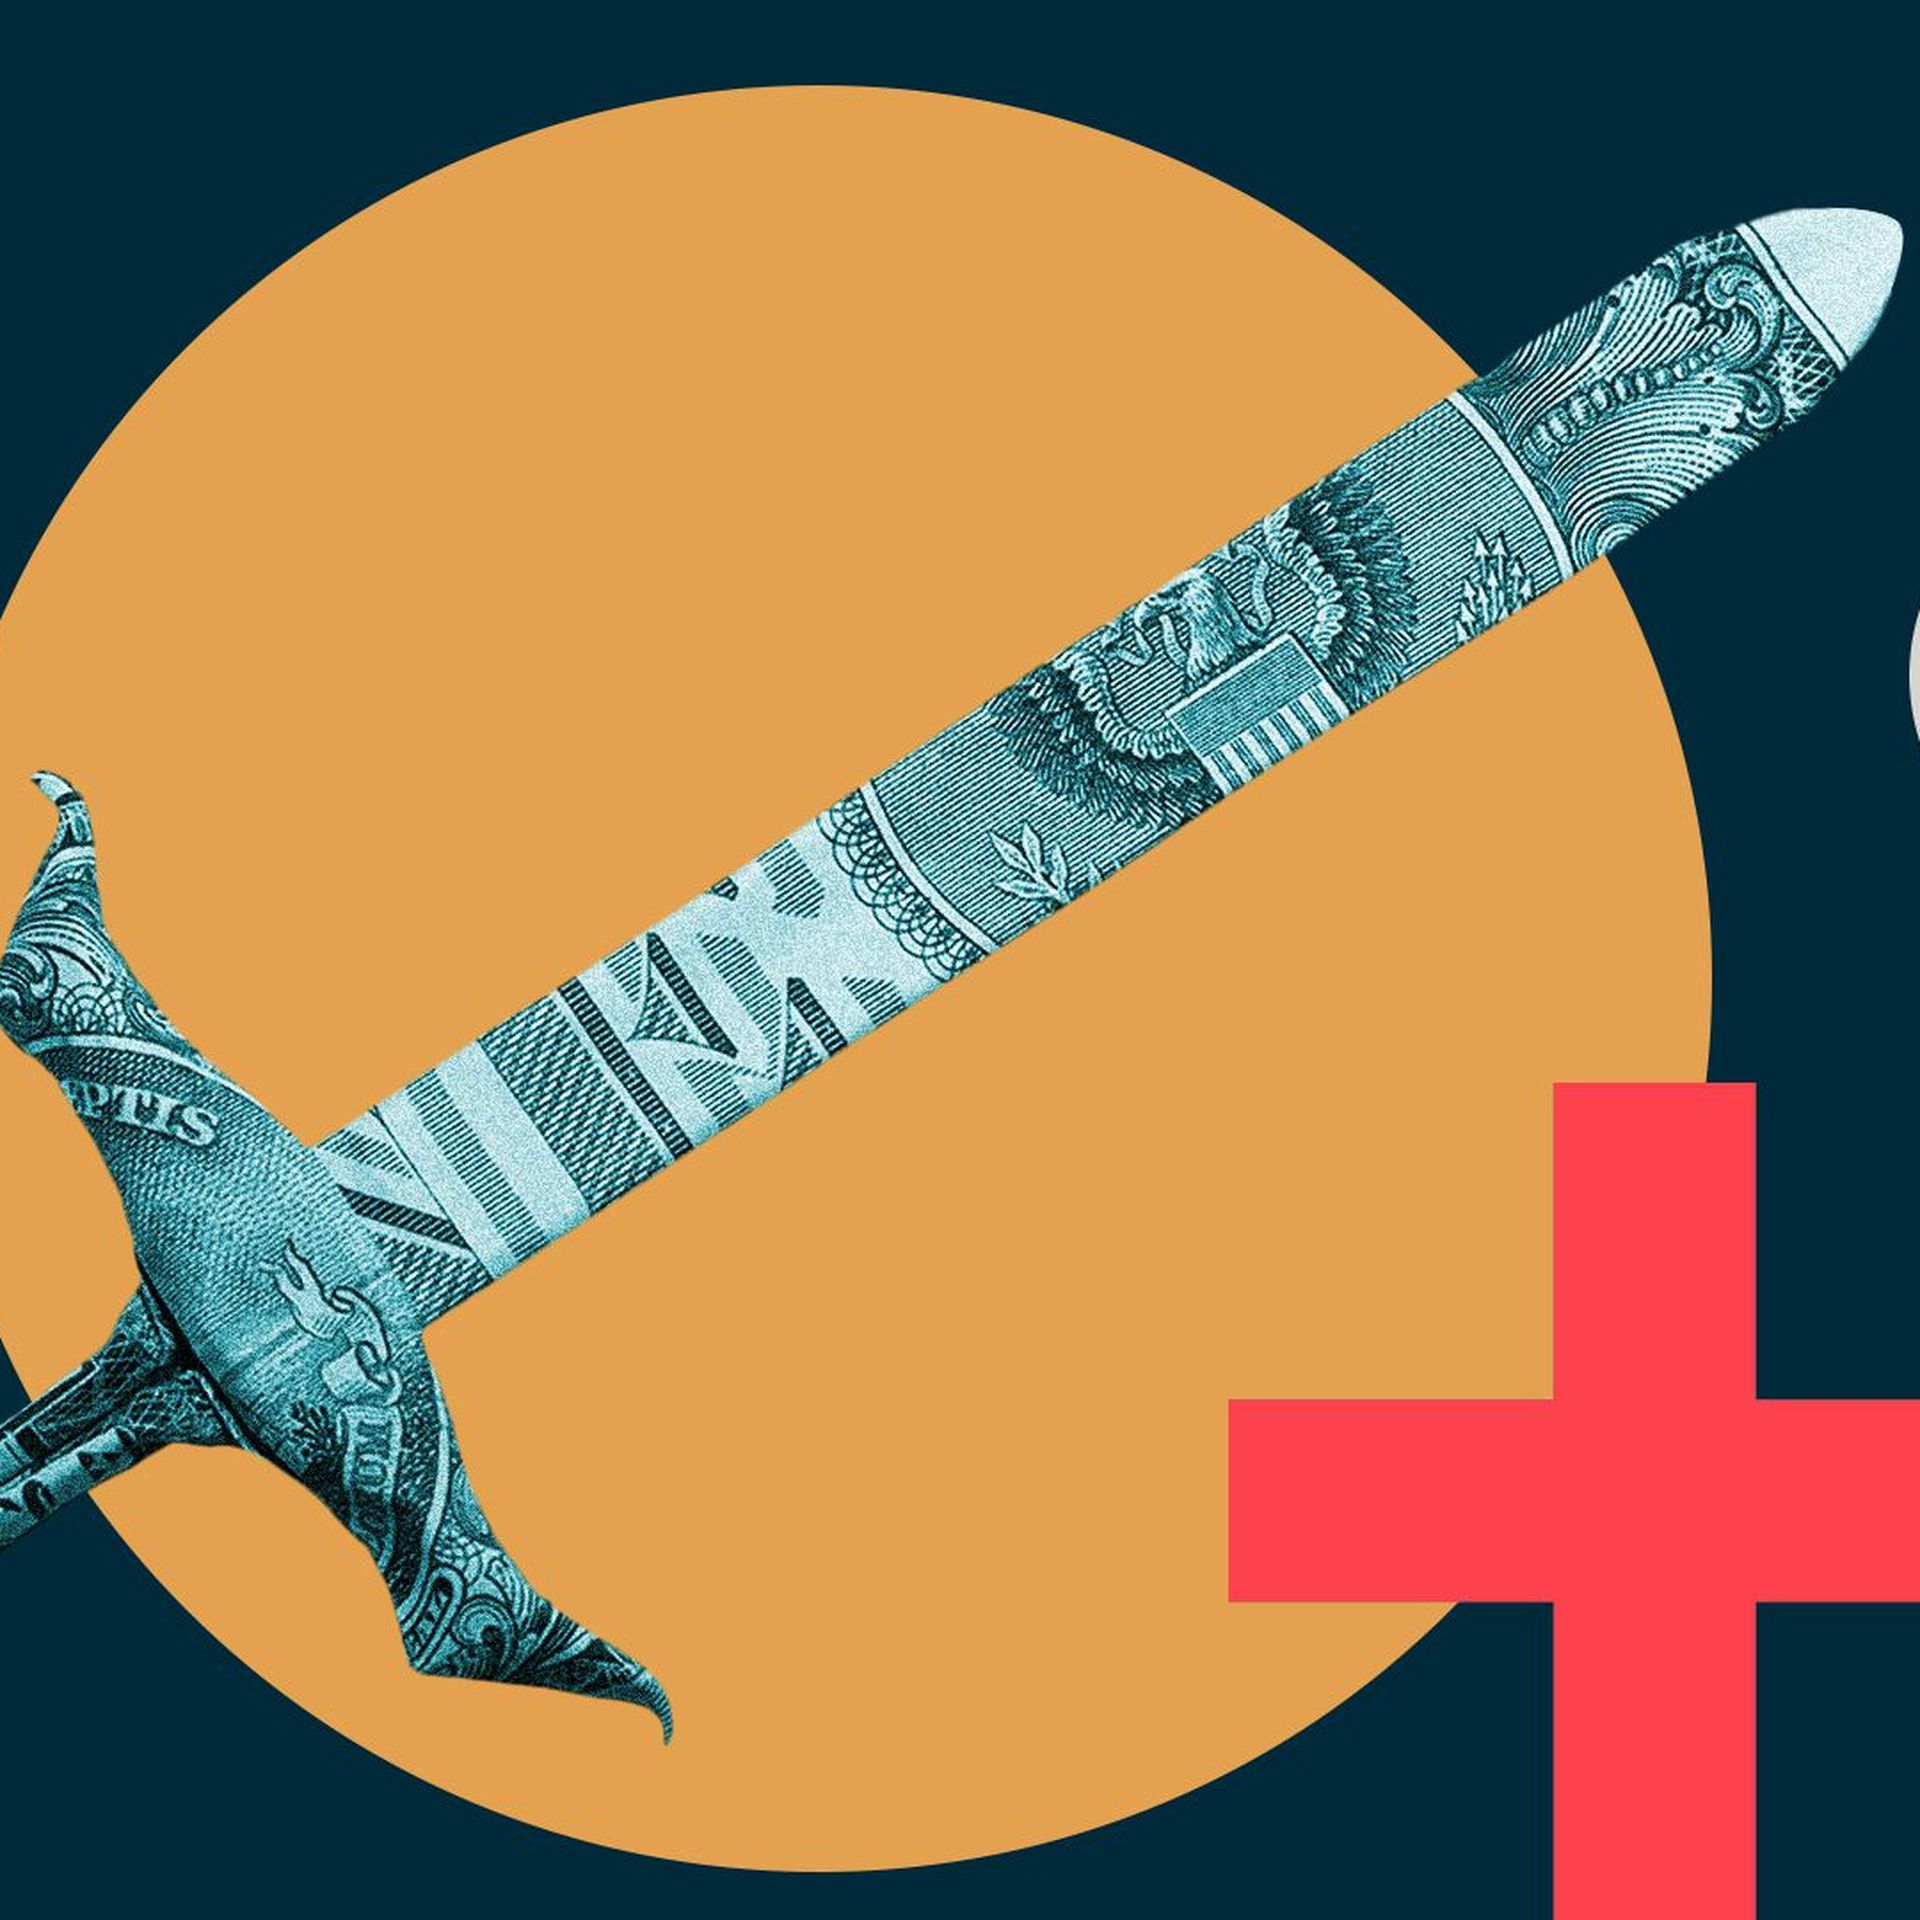 Illustration of a sword made from a dollar bill with medical cross and other shapes behind it